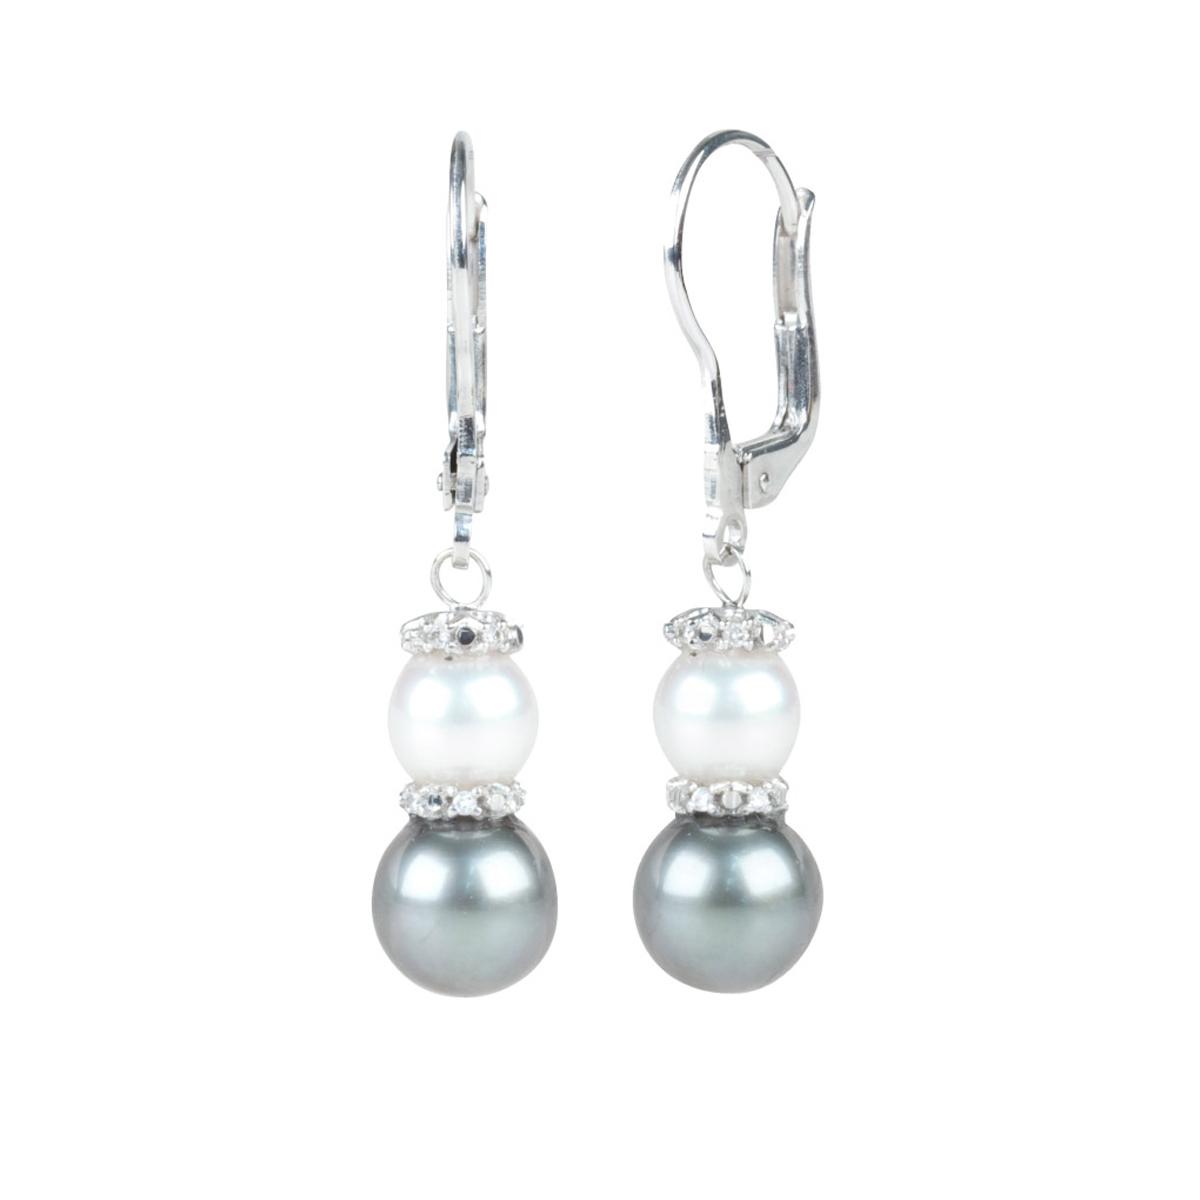 Hook earrings in 18 kt white gold with diamonds and black and white sea pearls, one 6.50-7mm and one 8-8.50 mm - OD279-4B